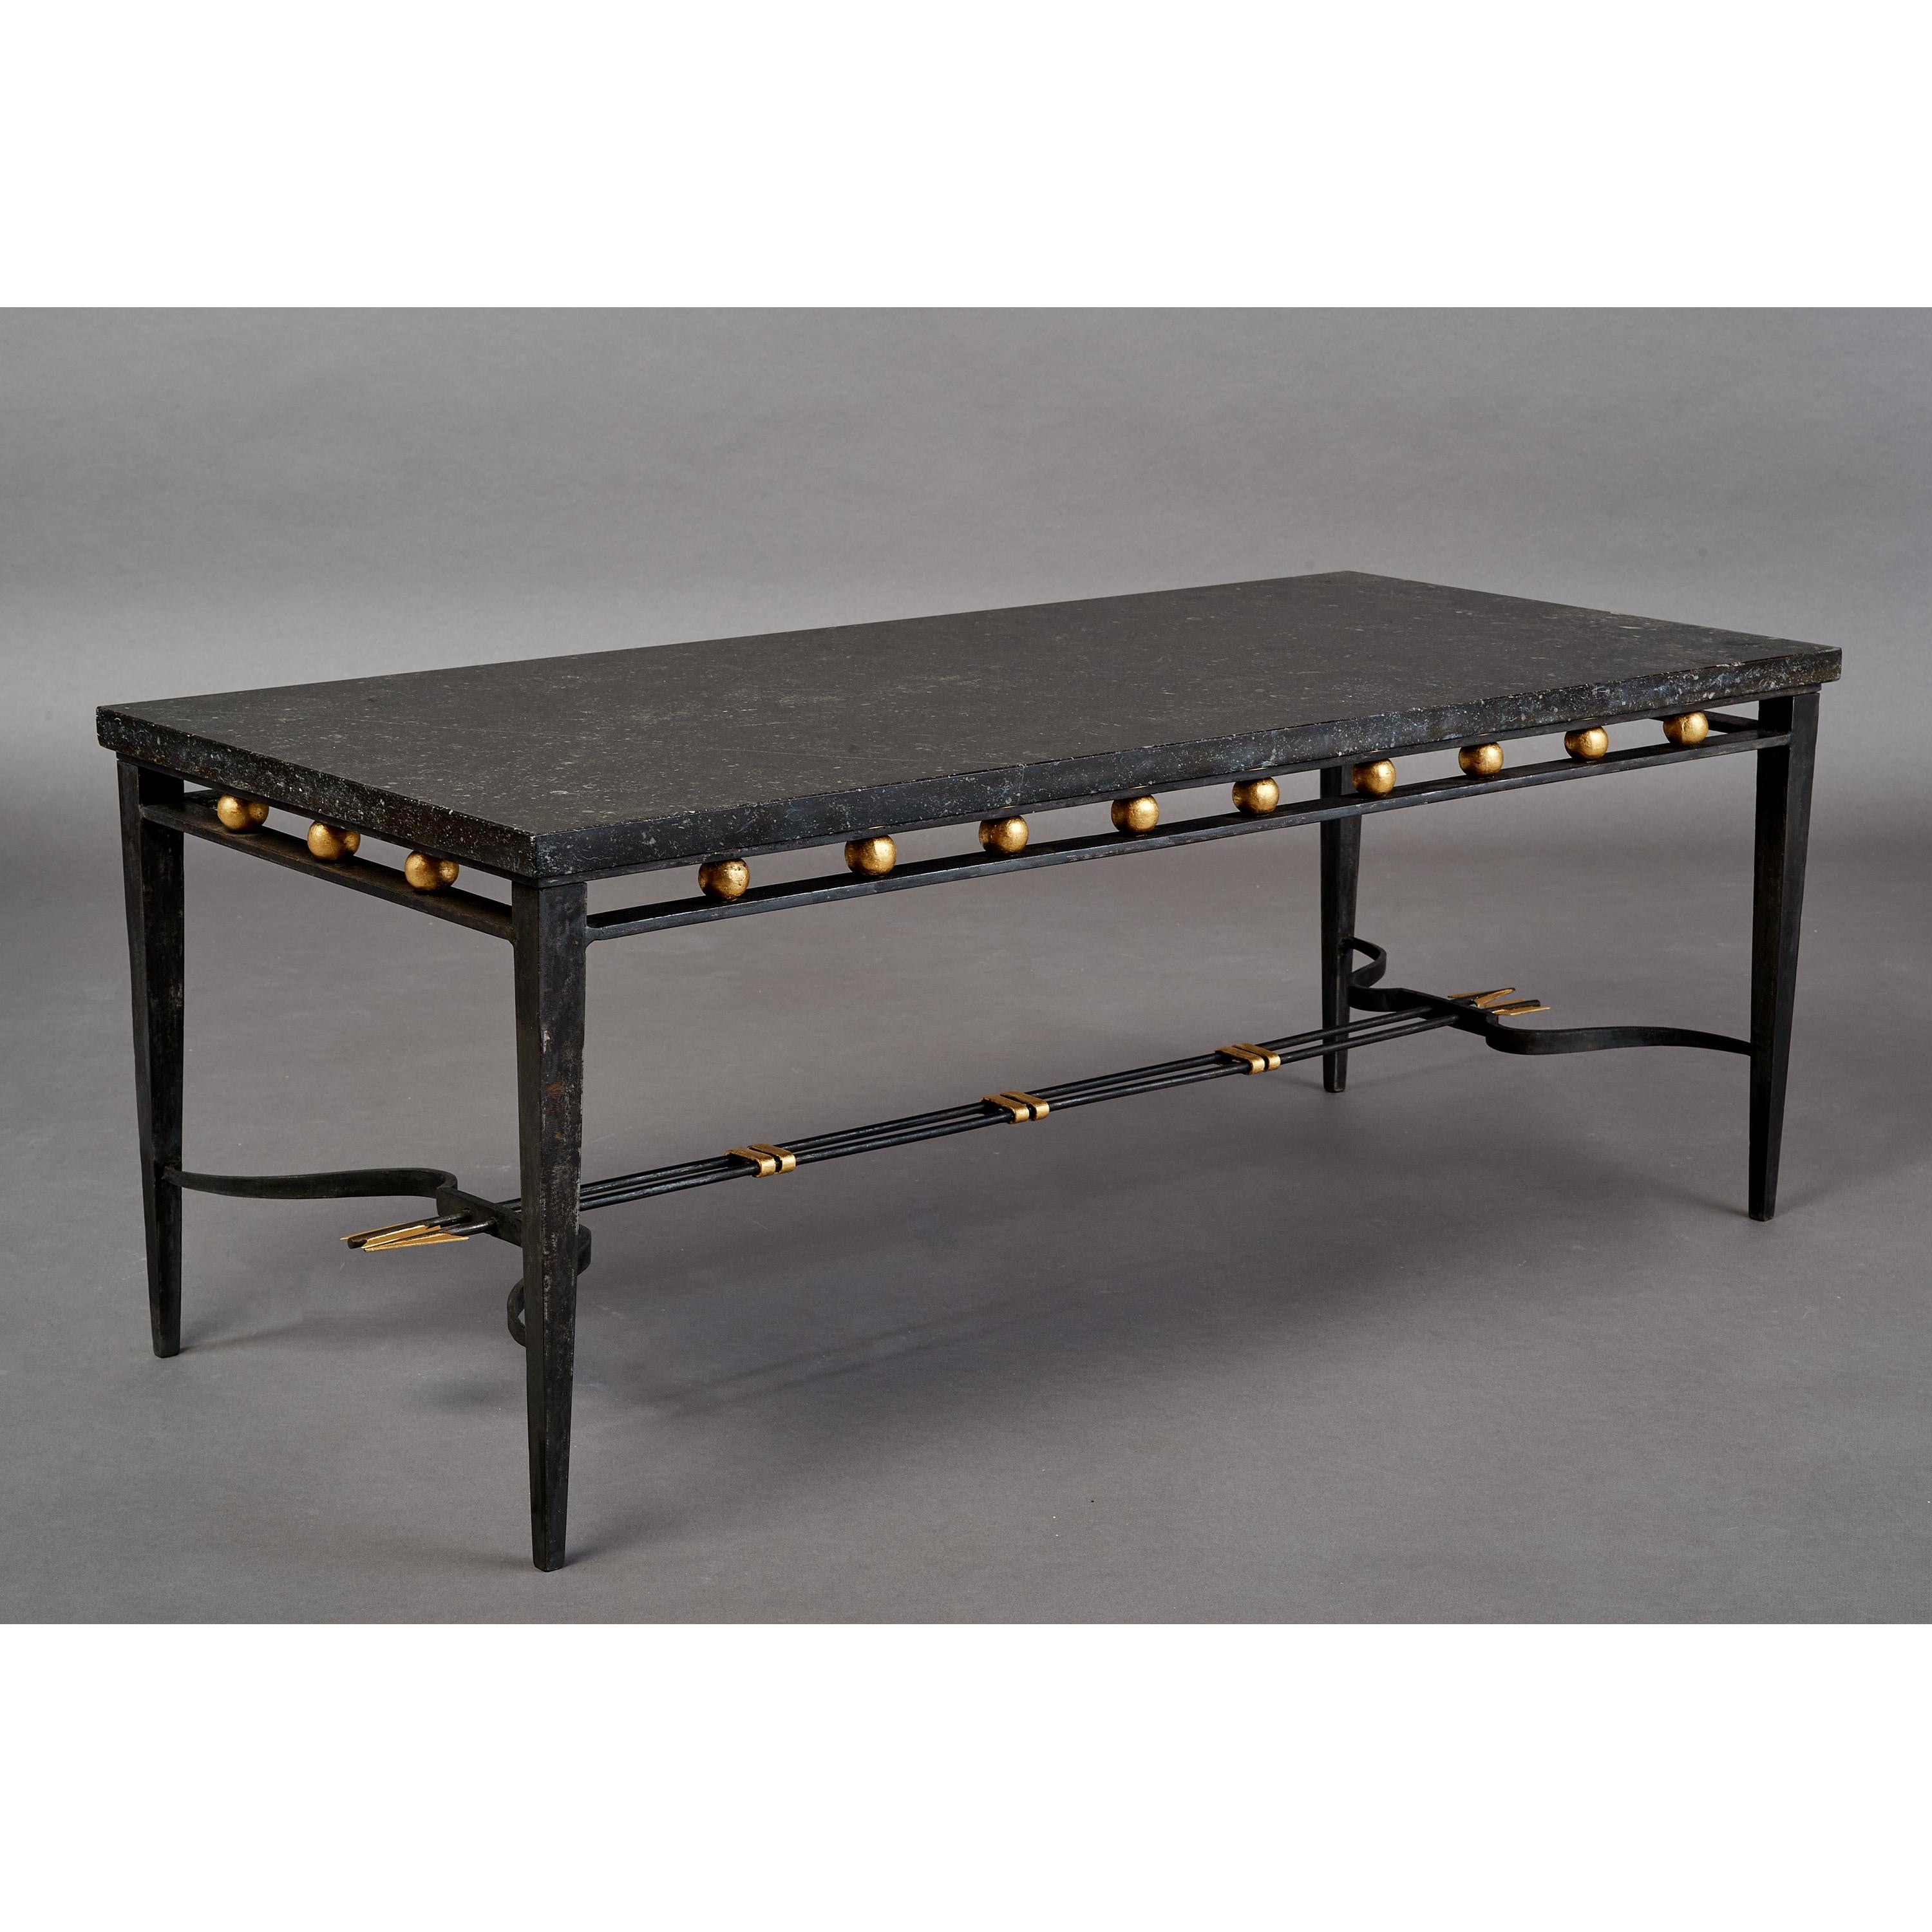 French Imposing Wrought Iron Table with Gilt Decor and Marble Top, France, 1950's